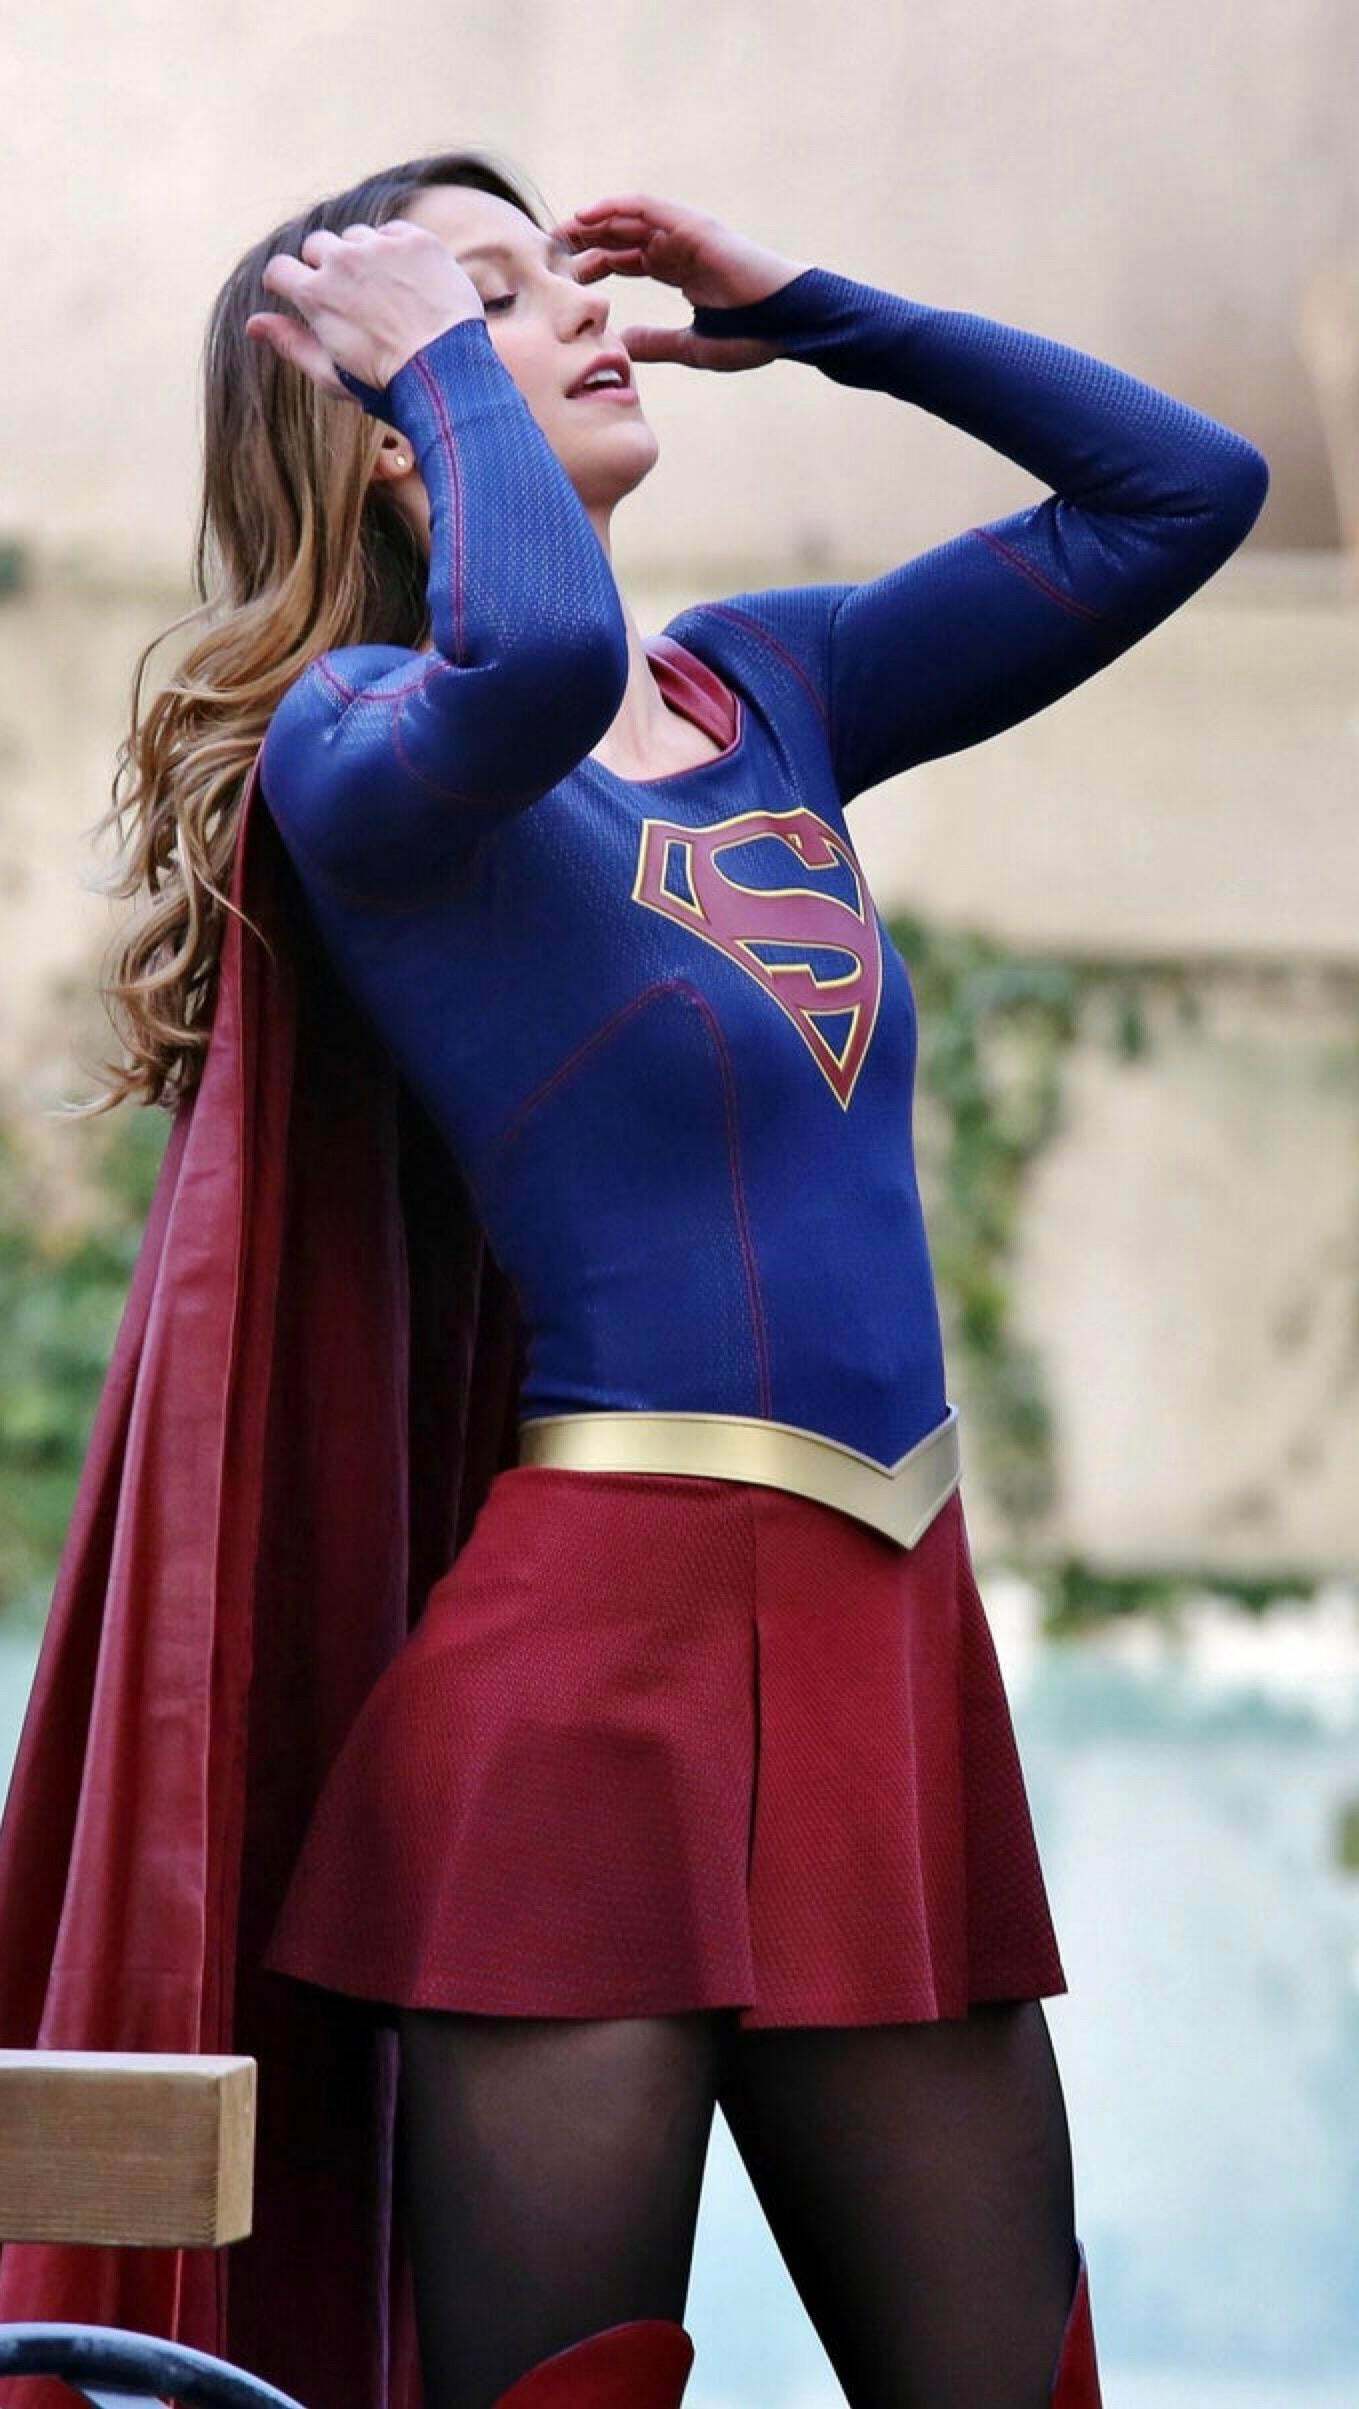 Cant get enough of Melissa Benoist right now Shes just